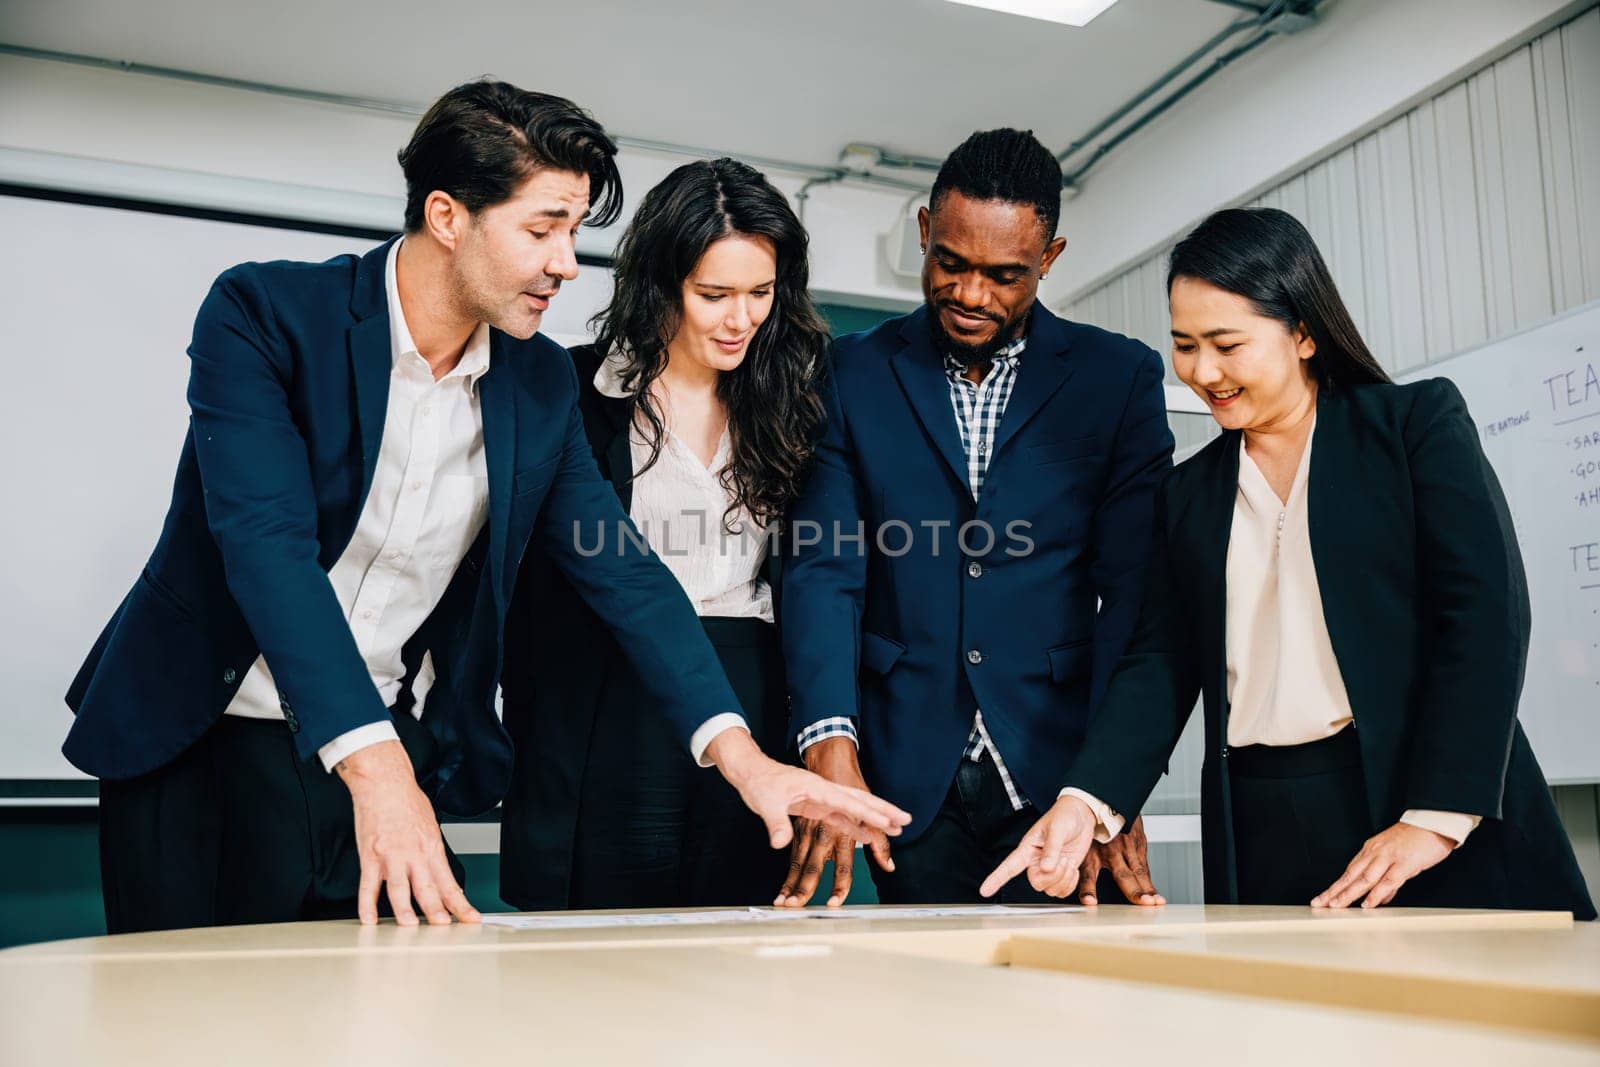 A group of professionals stands in a conference room, engaged in a successful meeting. Teamwork, planning, and smiles underscore their commitment to business success. by Sorapop